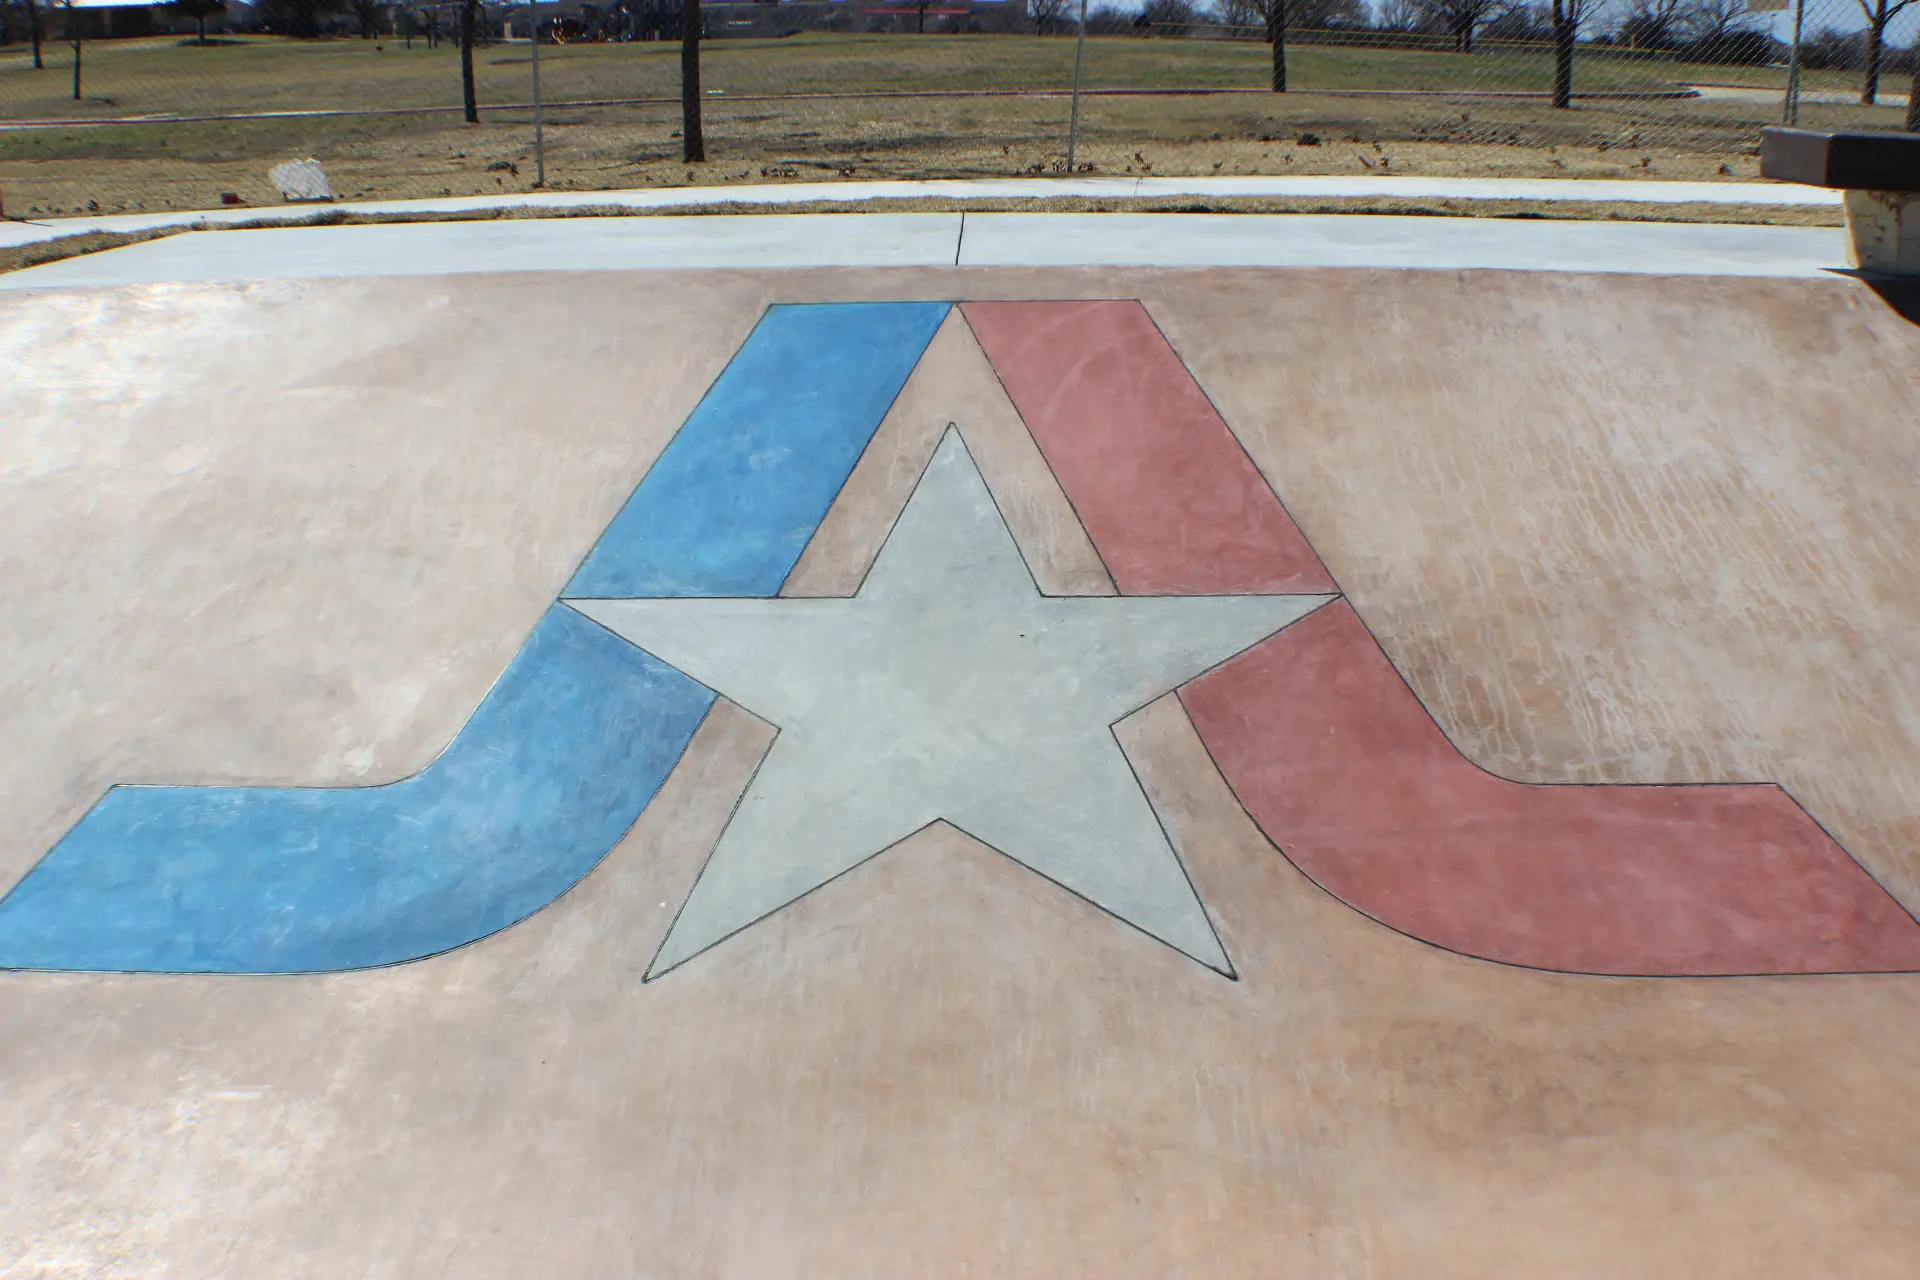 SPA Skateparks Recognized for Top Concrete Project in Fort Worth Area